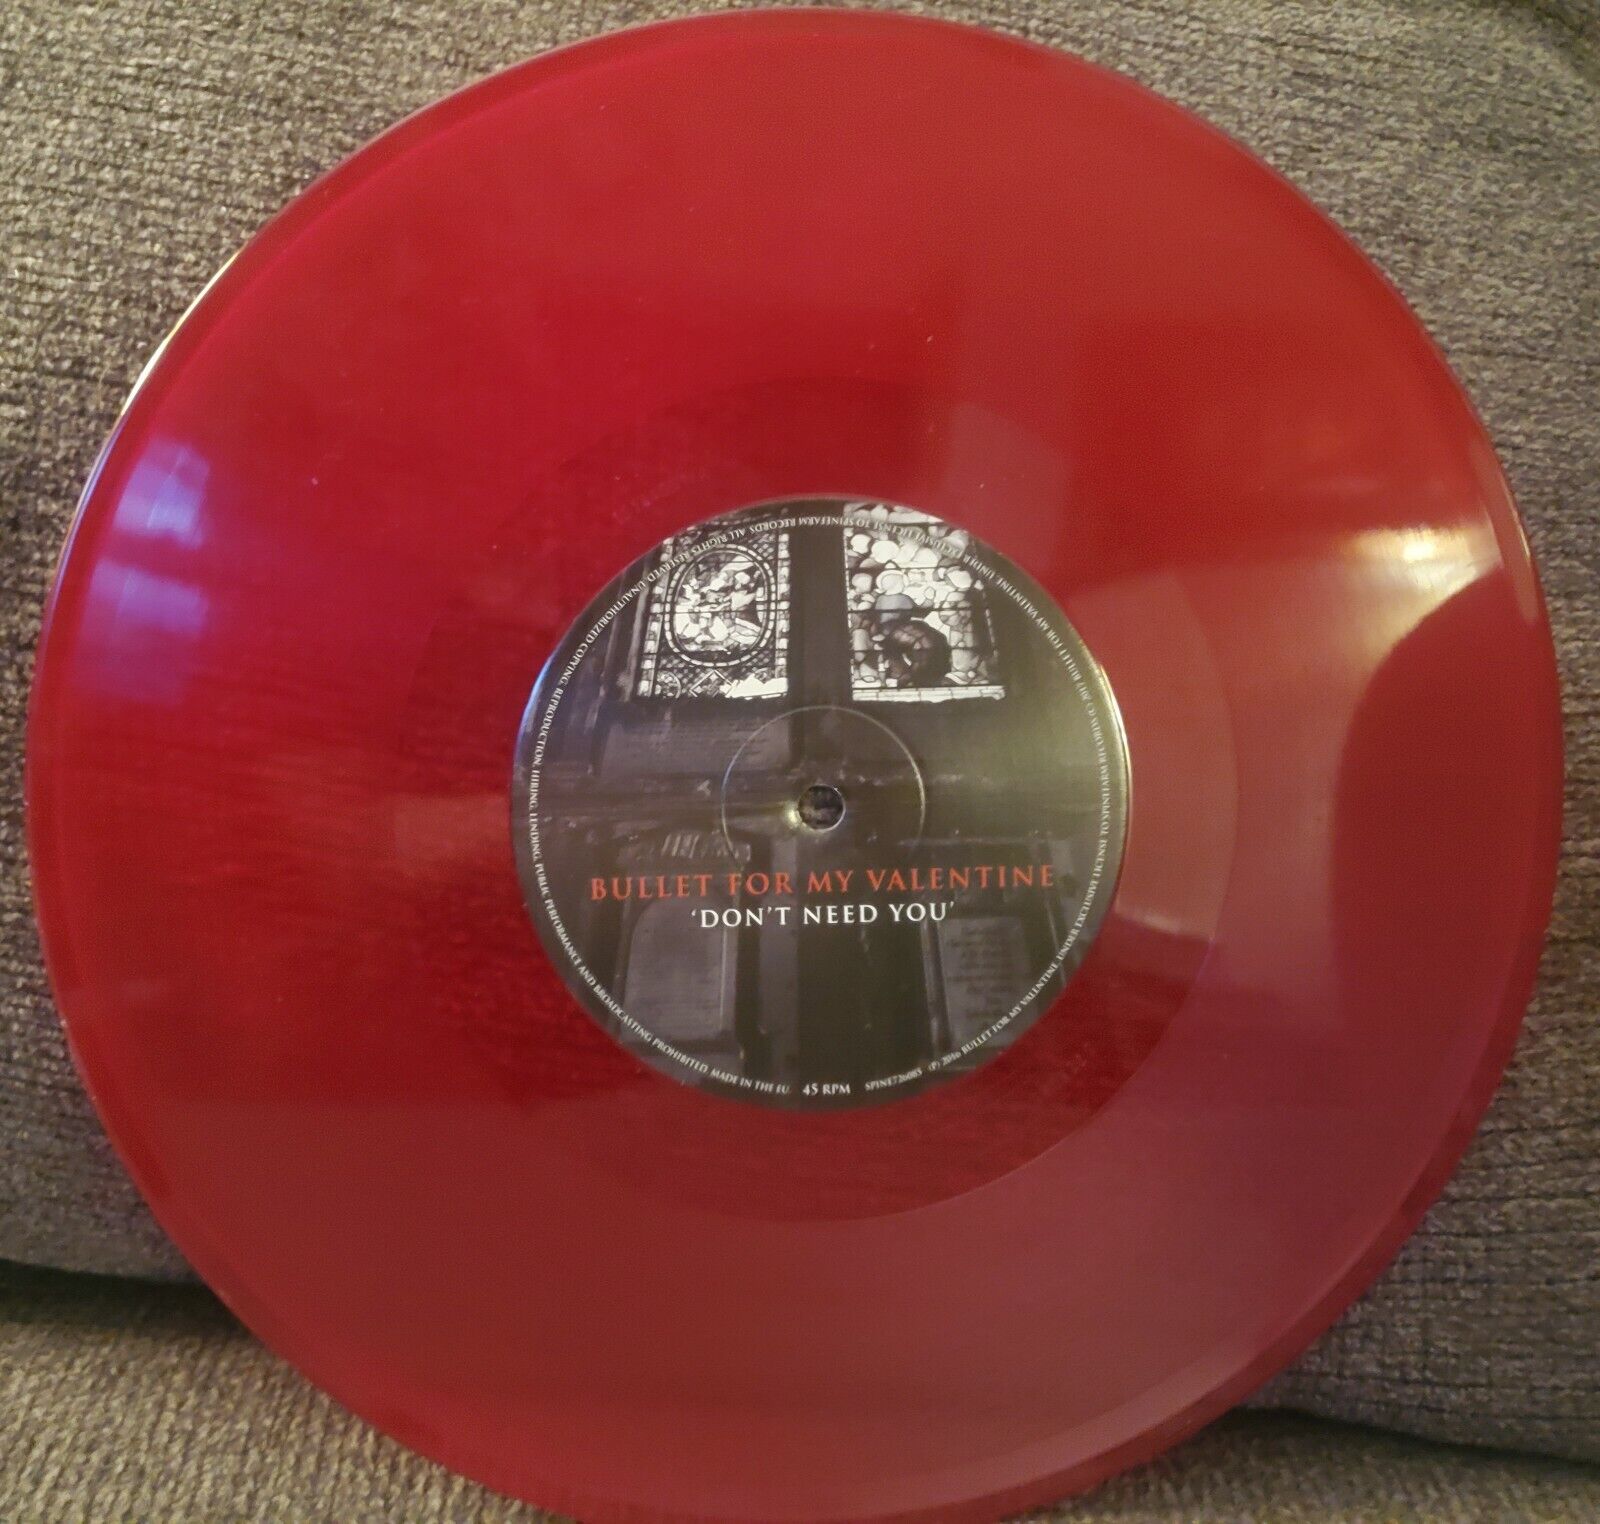 BULLET FOR MY VALENTINE "Don't Need You" 10" RSD 2017 RED VINYL NEW